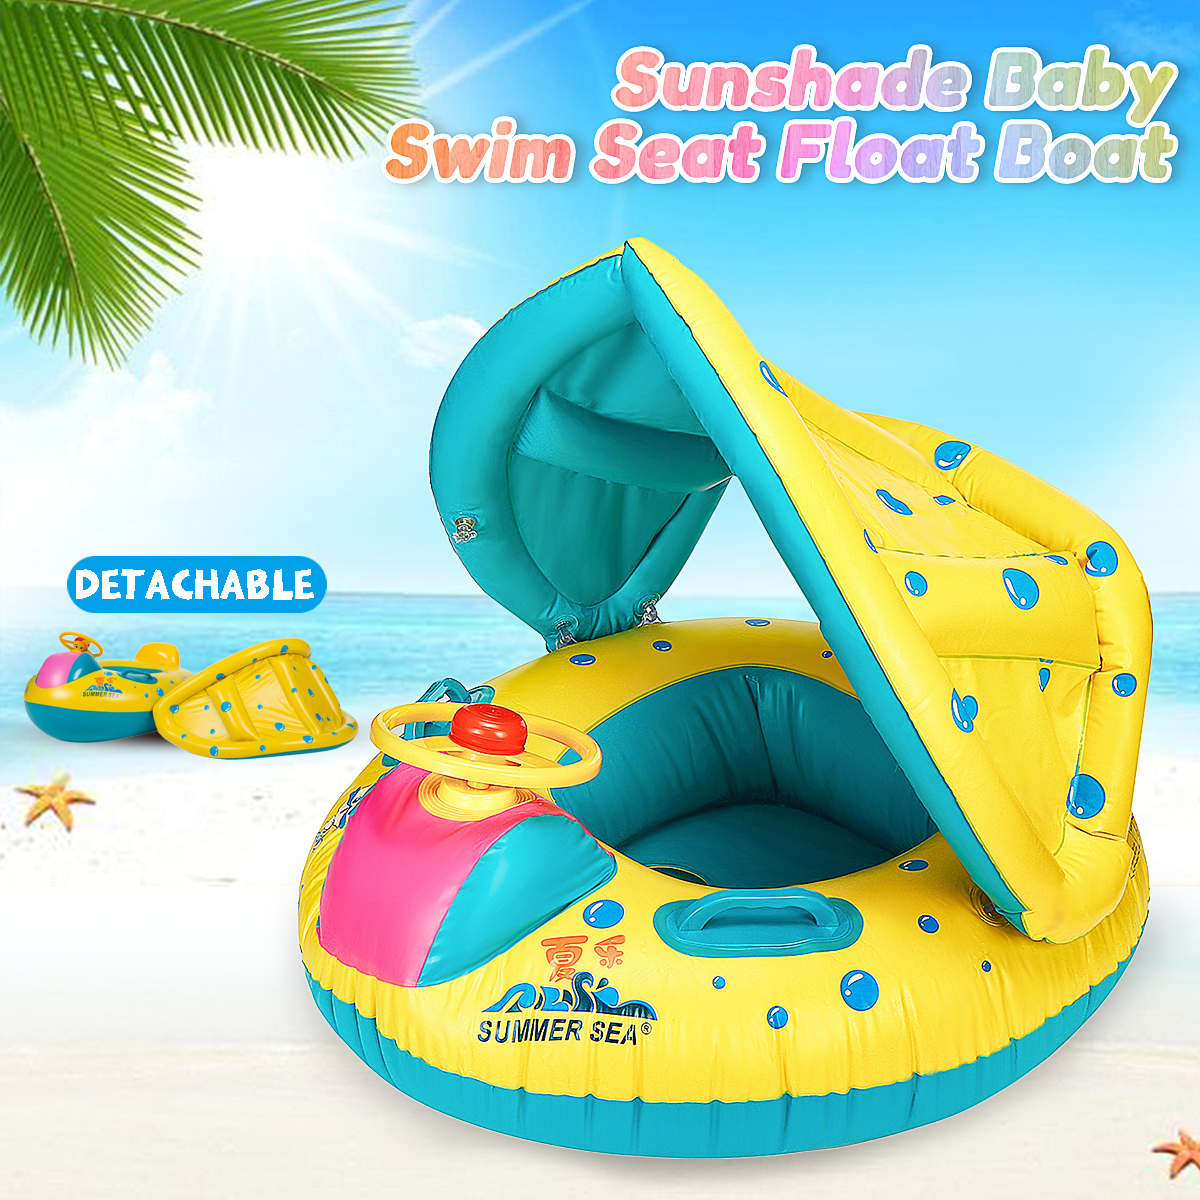 Baby-Inflatable-Swimming-Float-Ring-PVC-Lying-Water-Seat-Boat-Sunshade-Pool-Mattress-with-Canopy-Kid-1869041-1